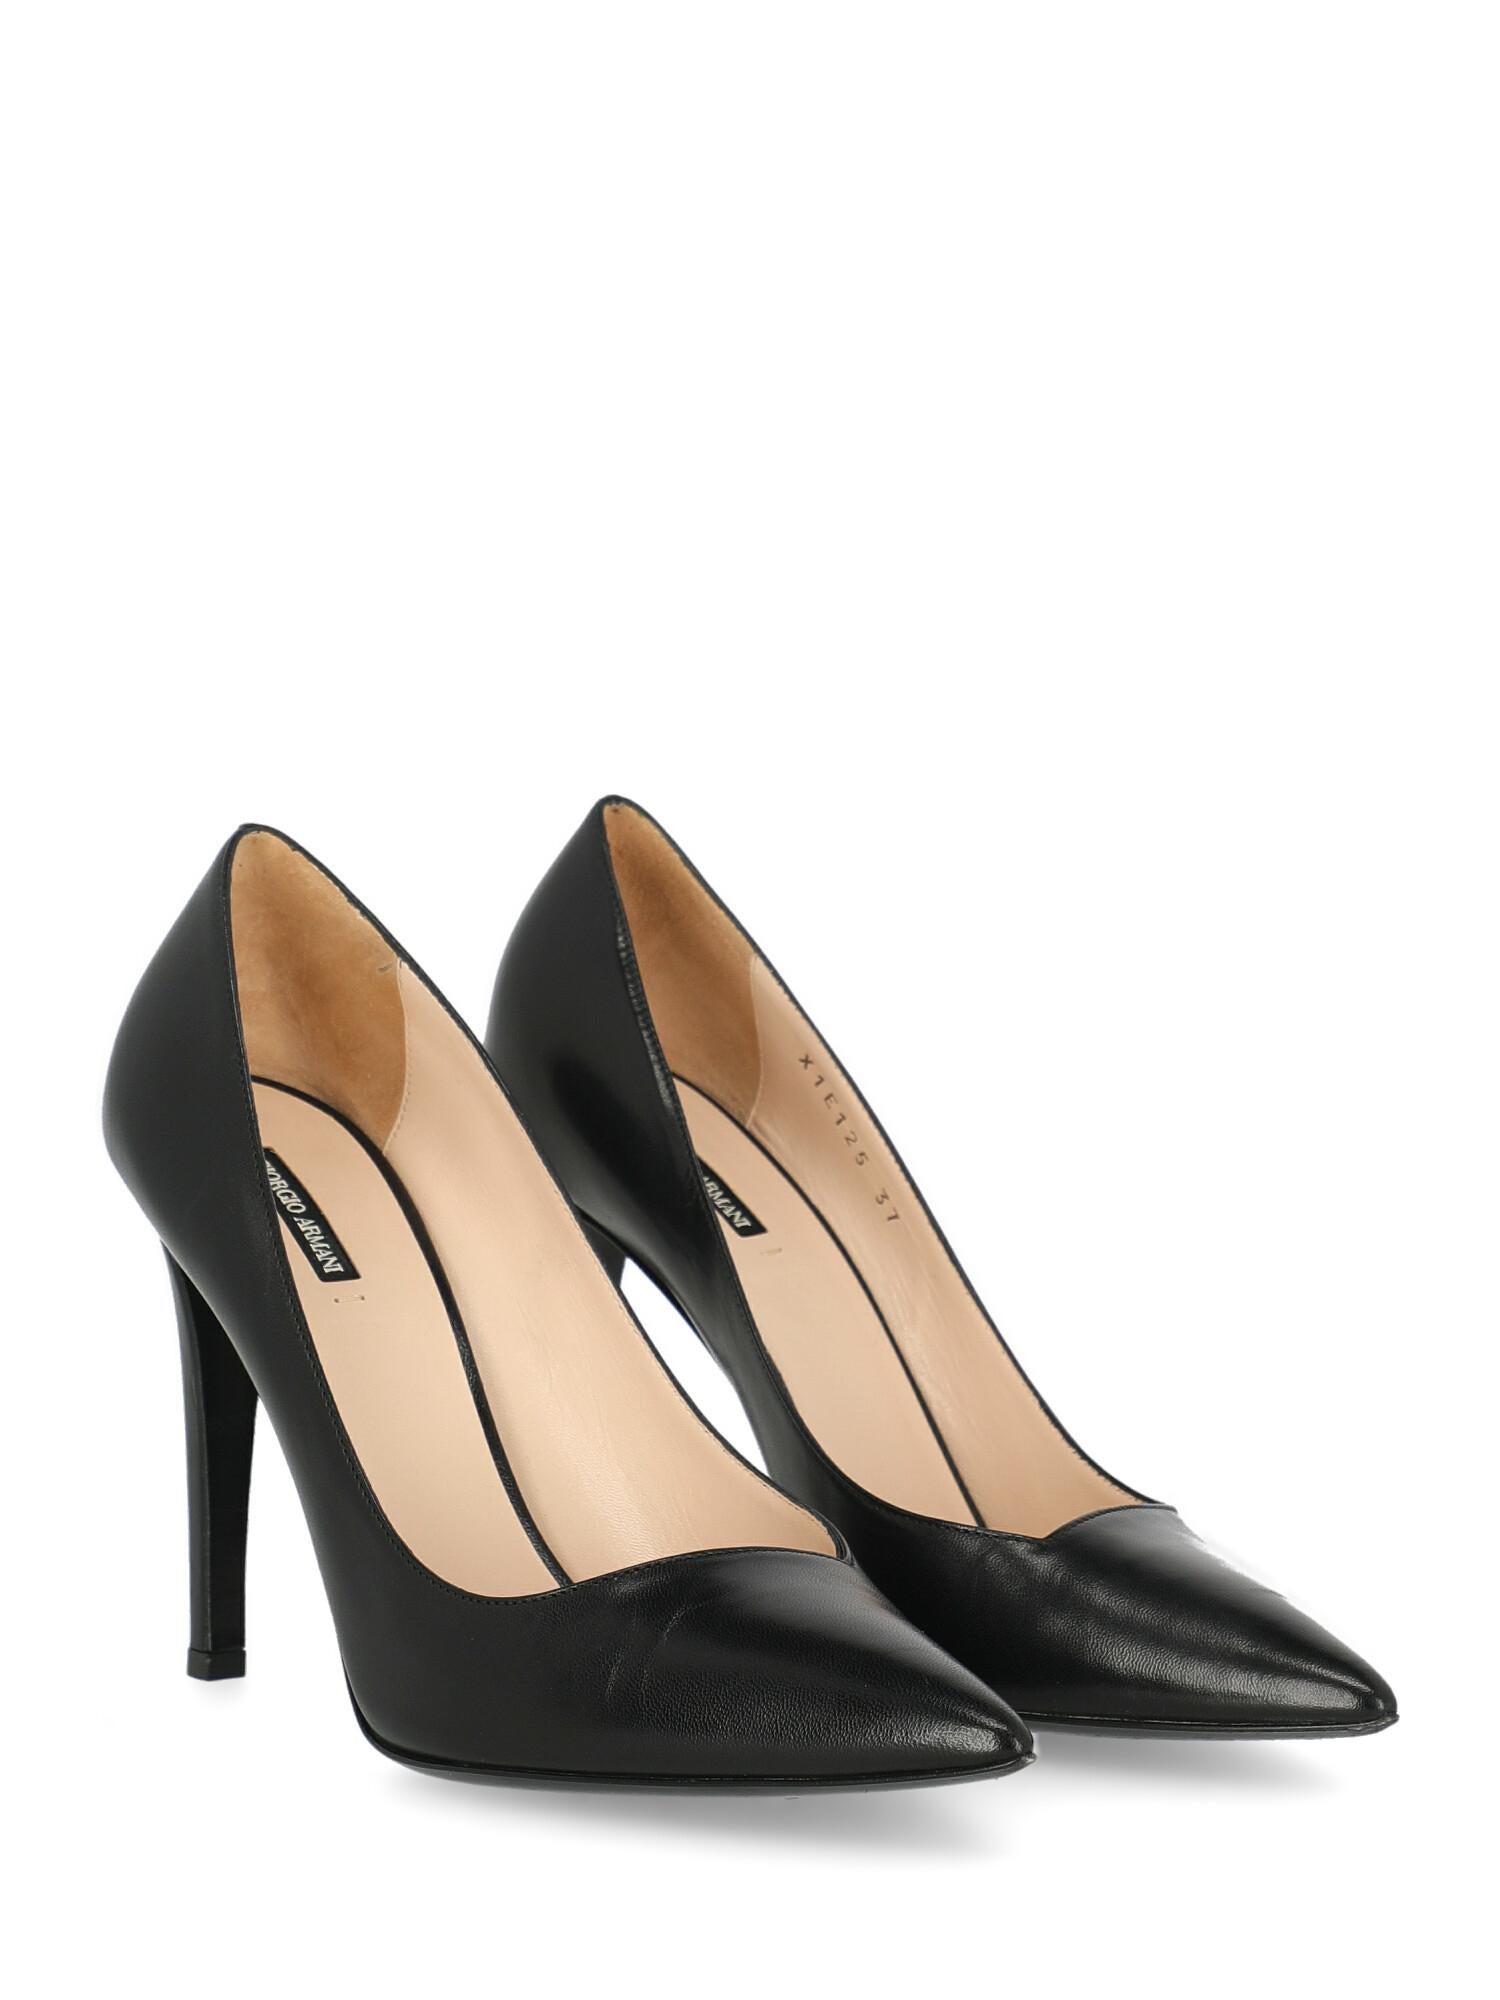 Woman, leather, solid color, internal logo, pointed toe, branded insole, tapered heel, high heel.

Includes:
- Dust bag
- Box
- Heel tip replacement

Product Condition: Excellent
Sole: negligible marks. Upper: negligible wrinkle.

Measurements:
Heel